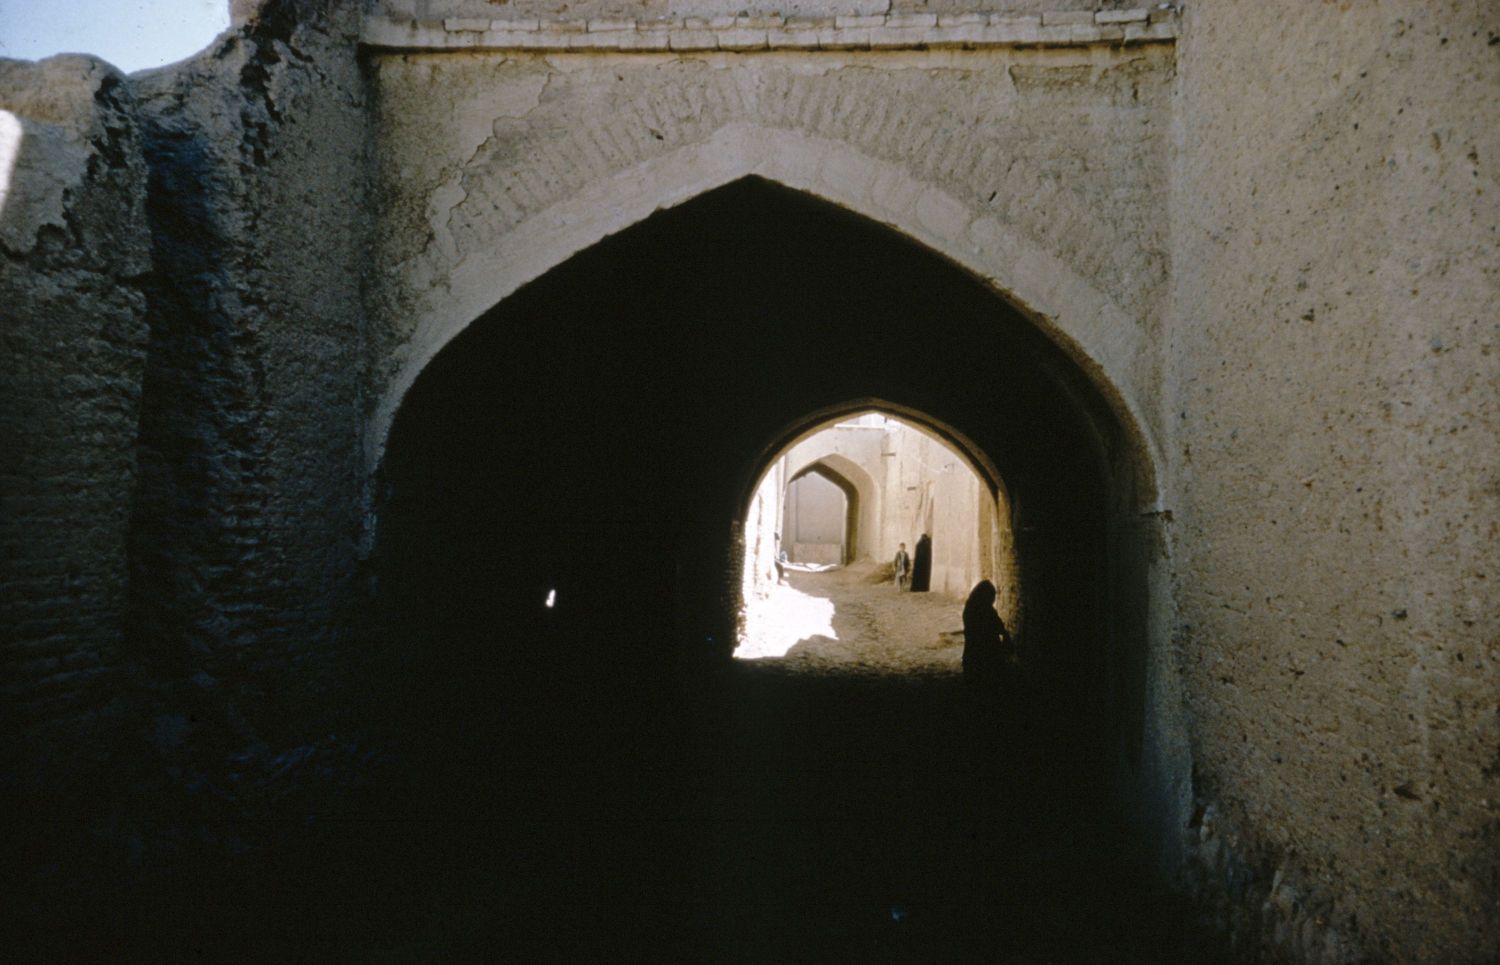 View of an alley in Na'in, Iran.